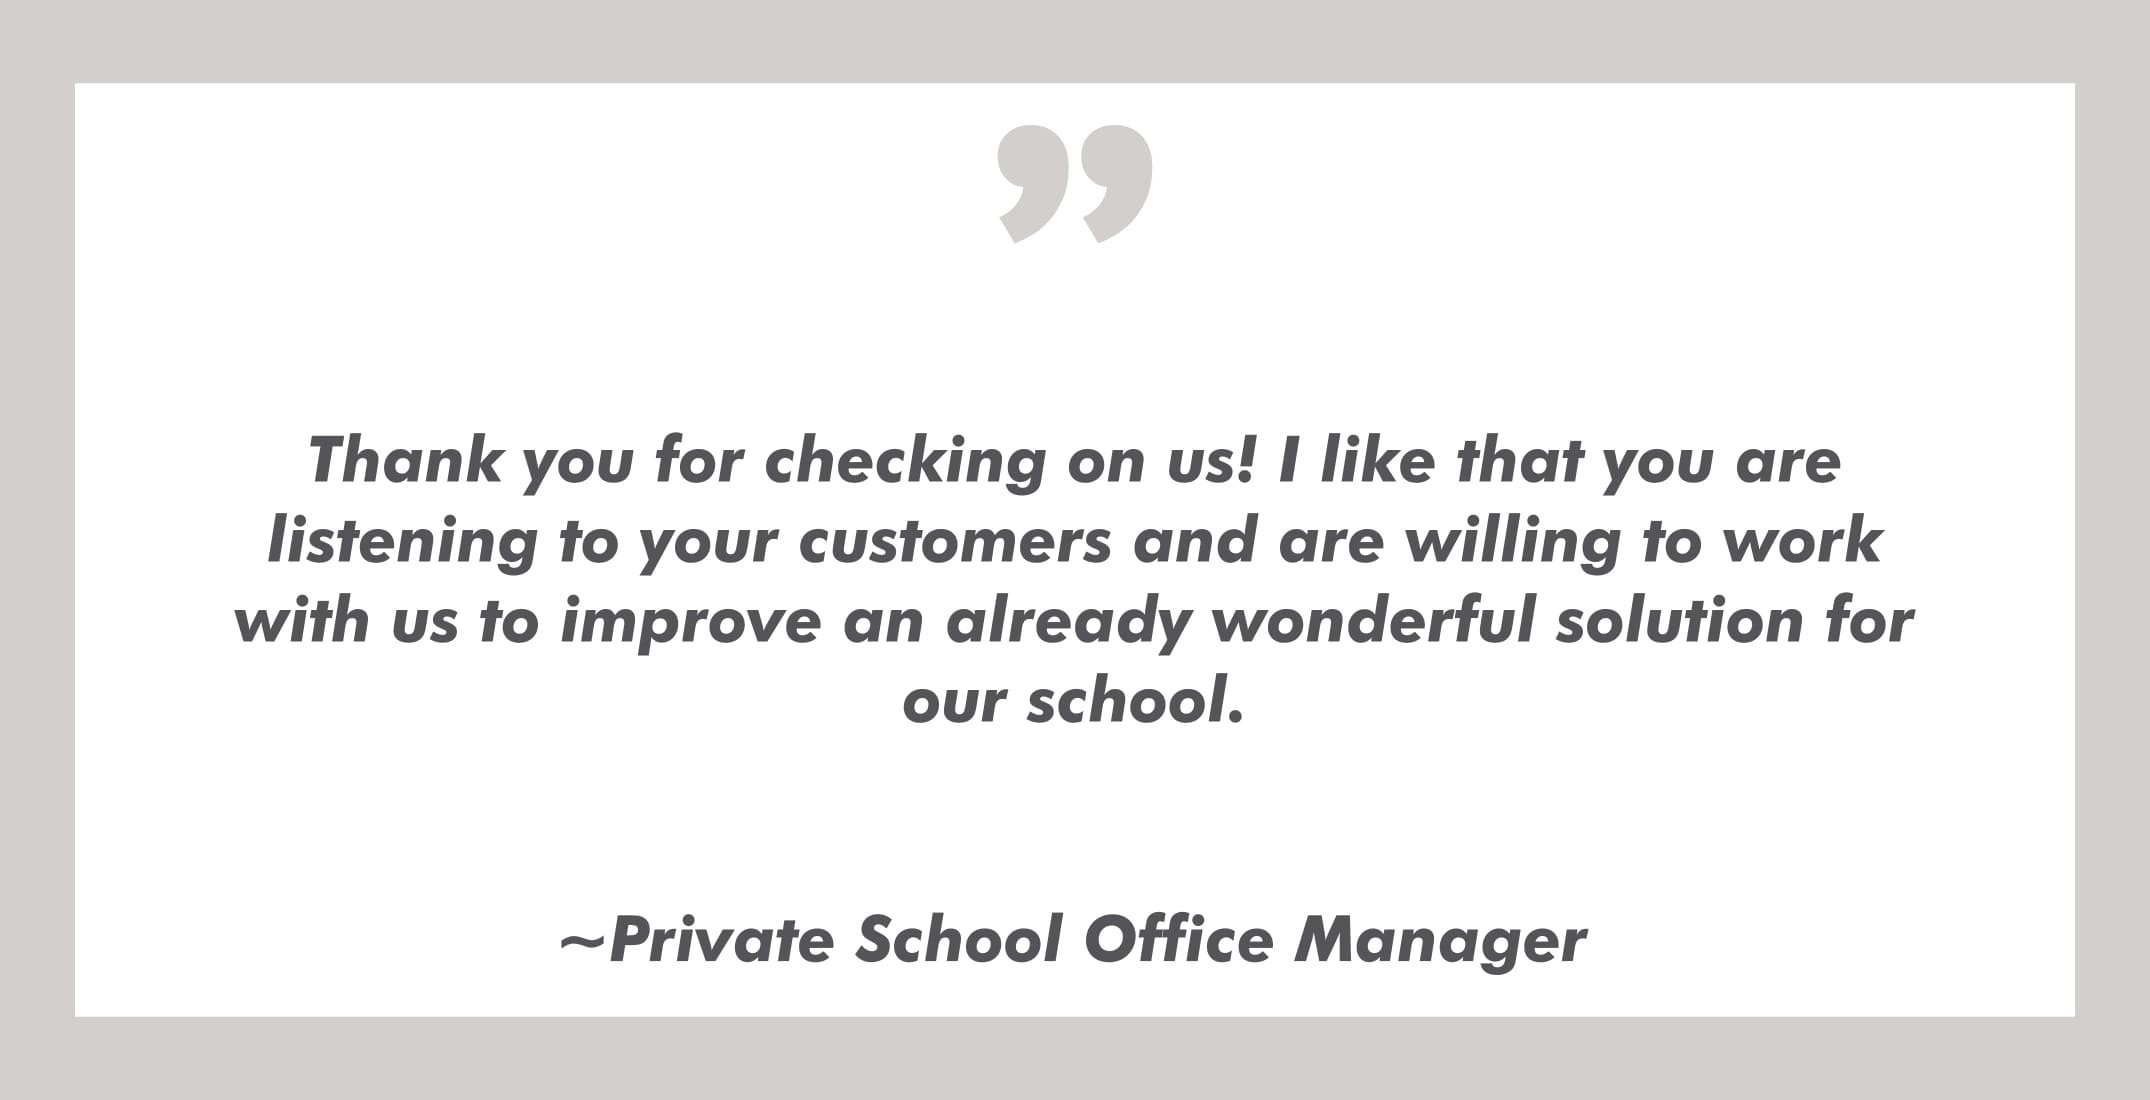 PickUp Patrol student dismissal app testimonial from private school office manager